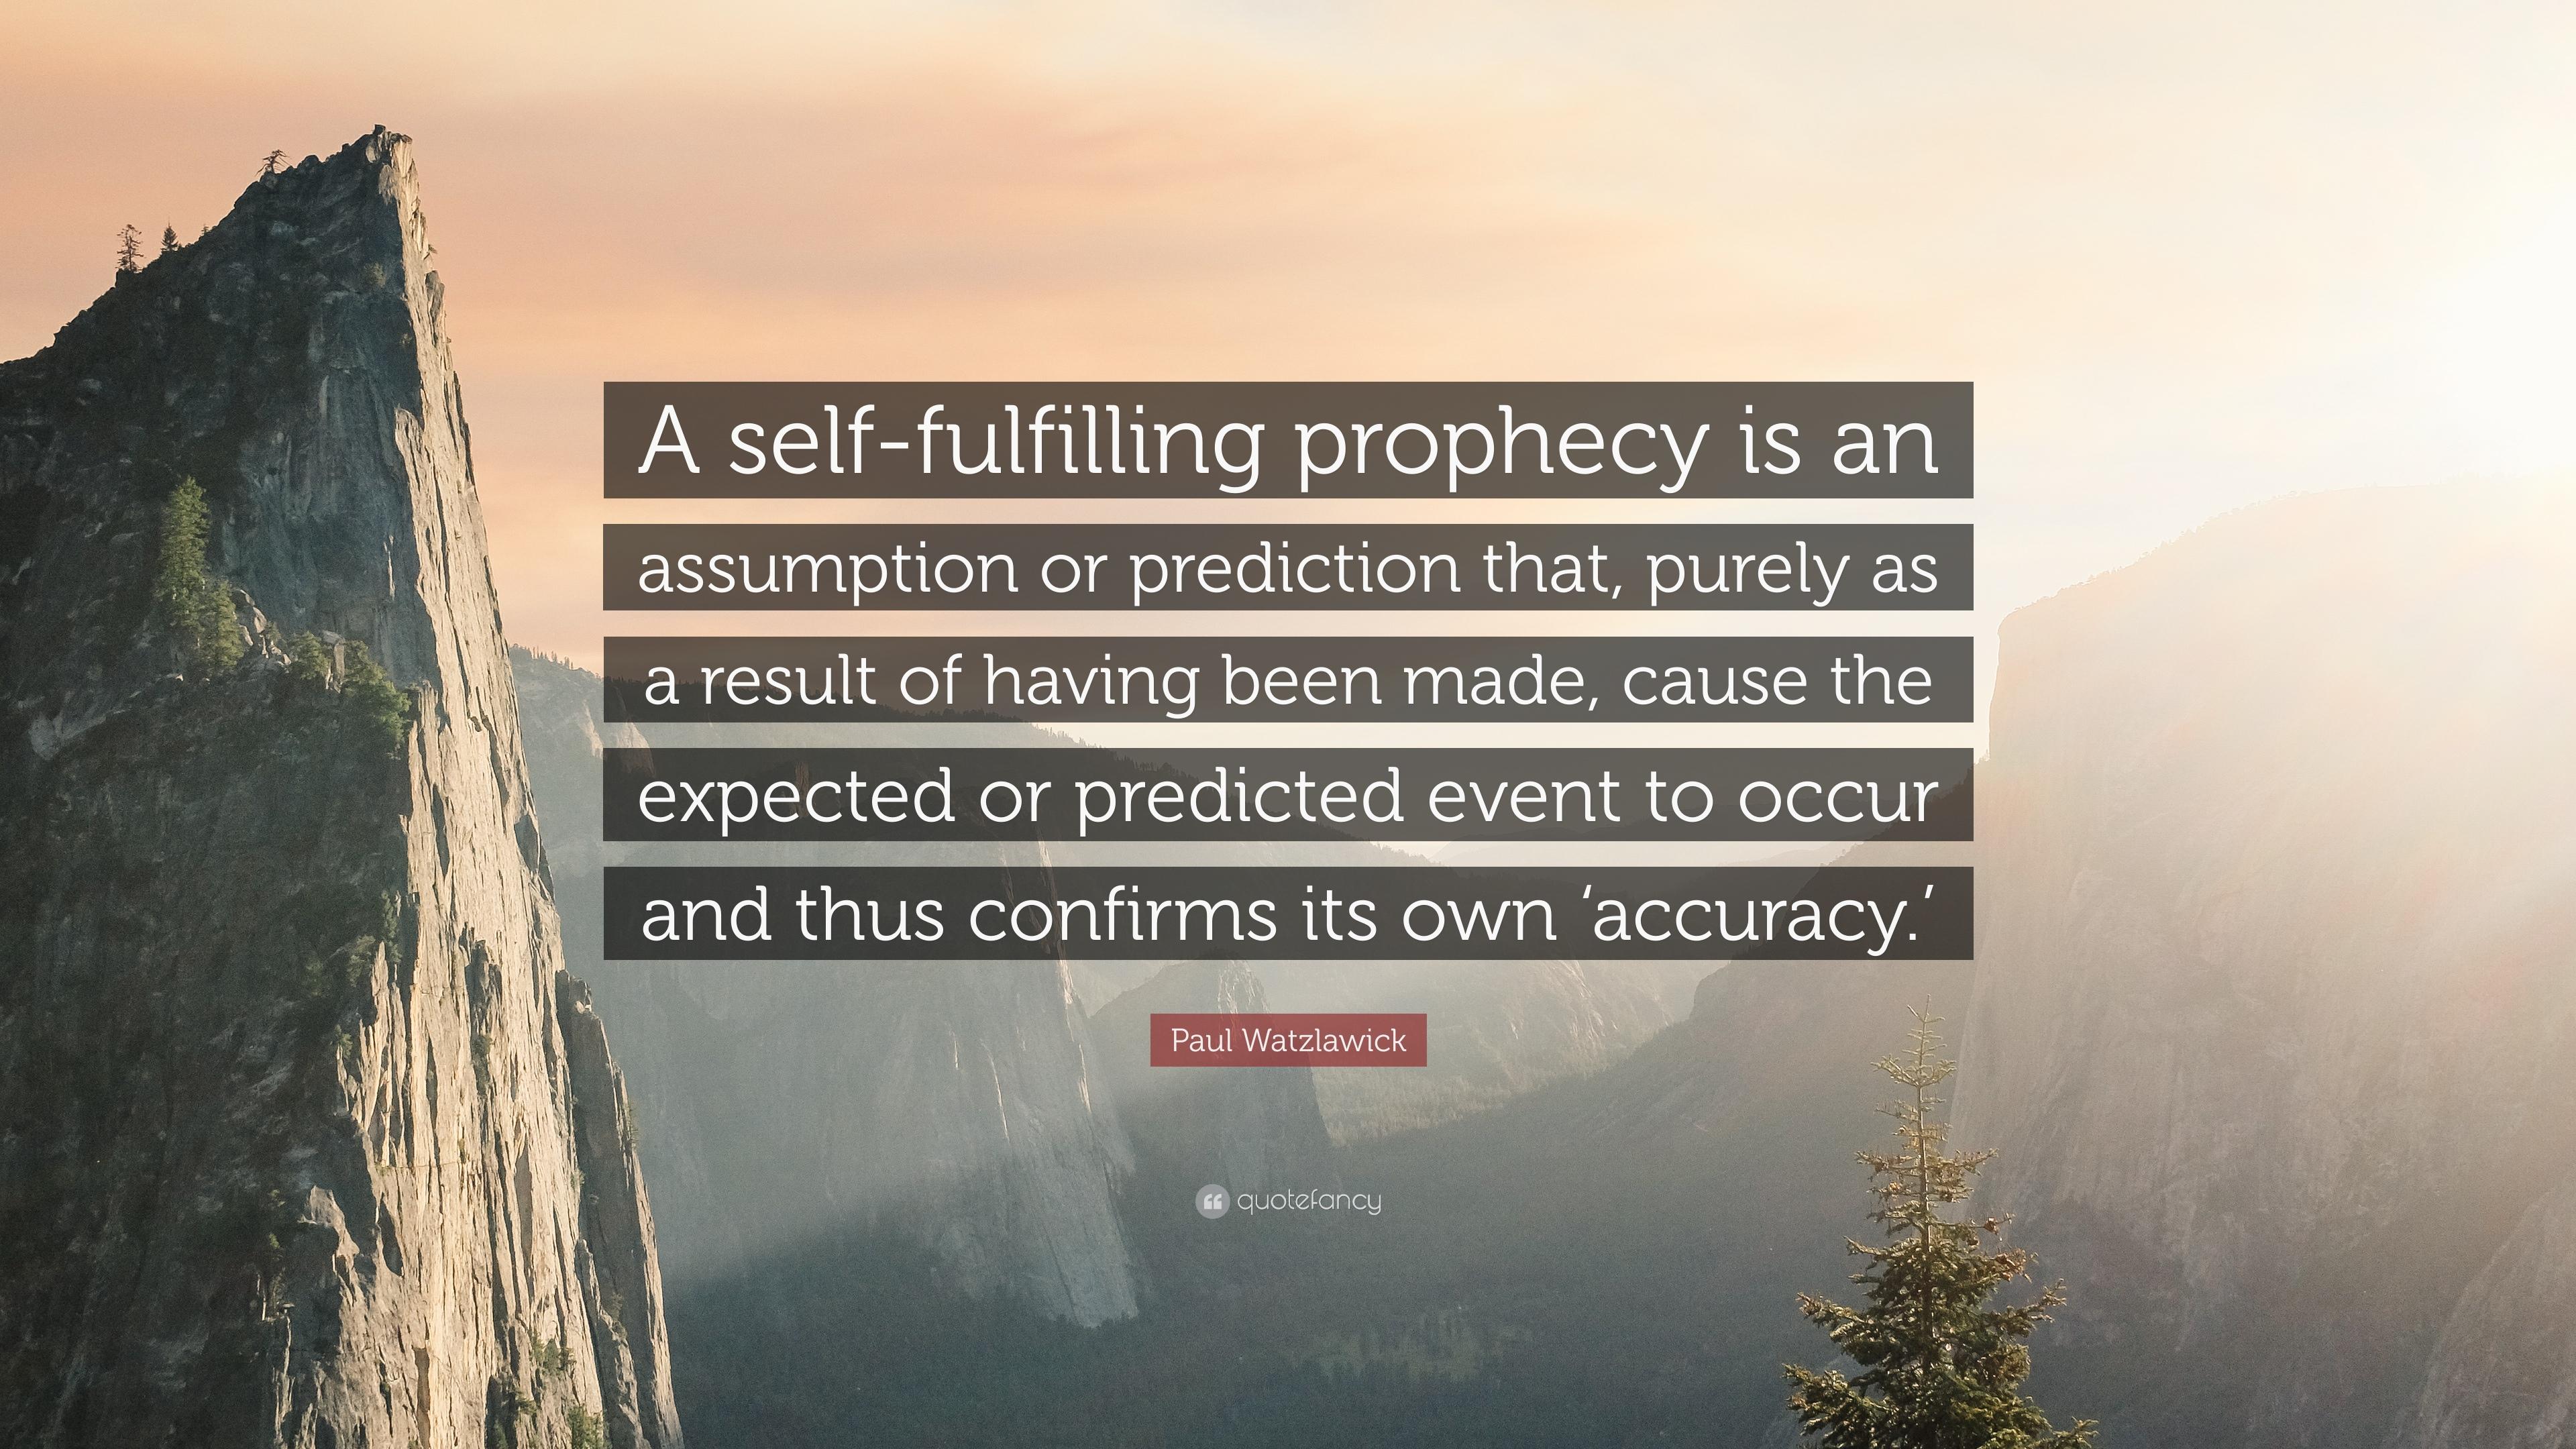 Paul Watzlawick Quote: “A Self Fulfilling Prophecy Is An